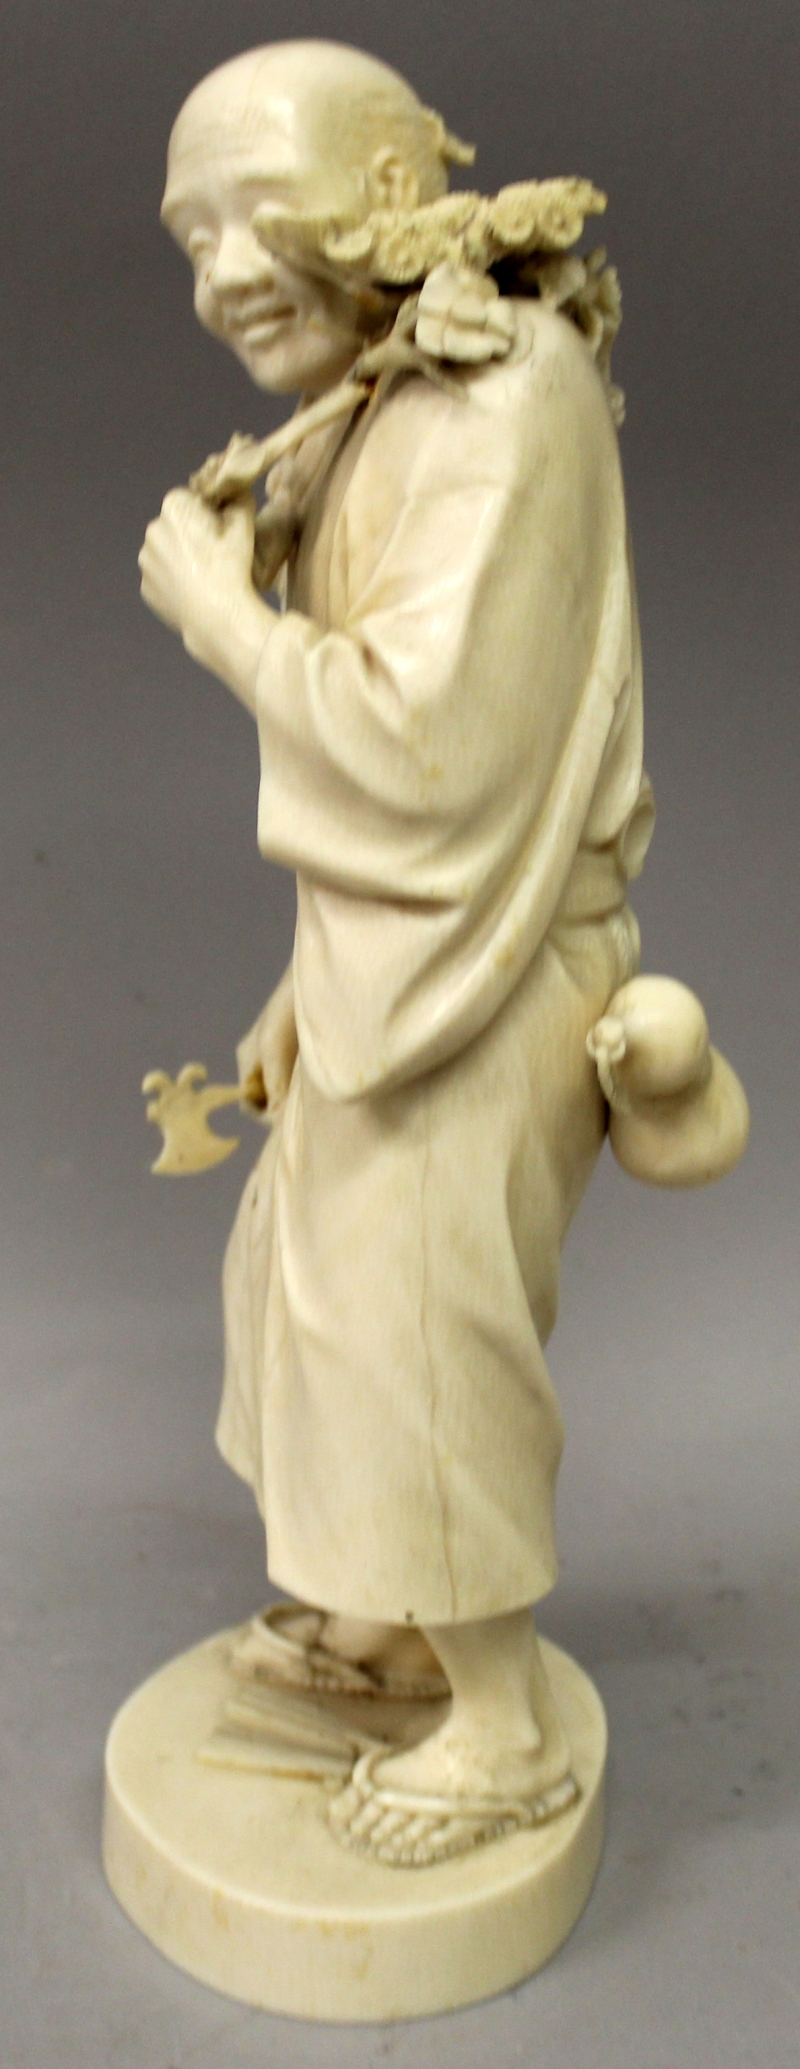 A LARGE GOOD QUALITY JAPANESE MEIJI PERIOD TOKYO SCHOOL IVORY OKIMONO OF A STANDING MAN, holding - Image 4 of 8